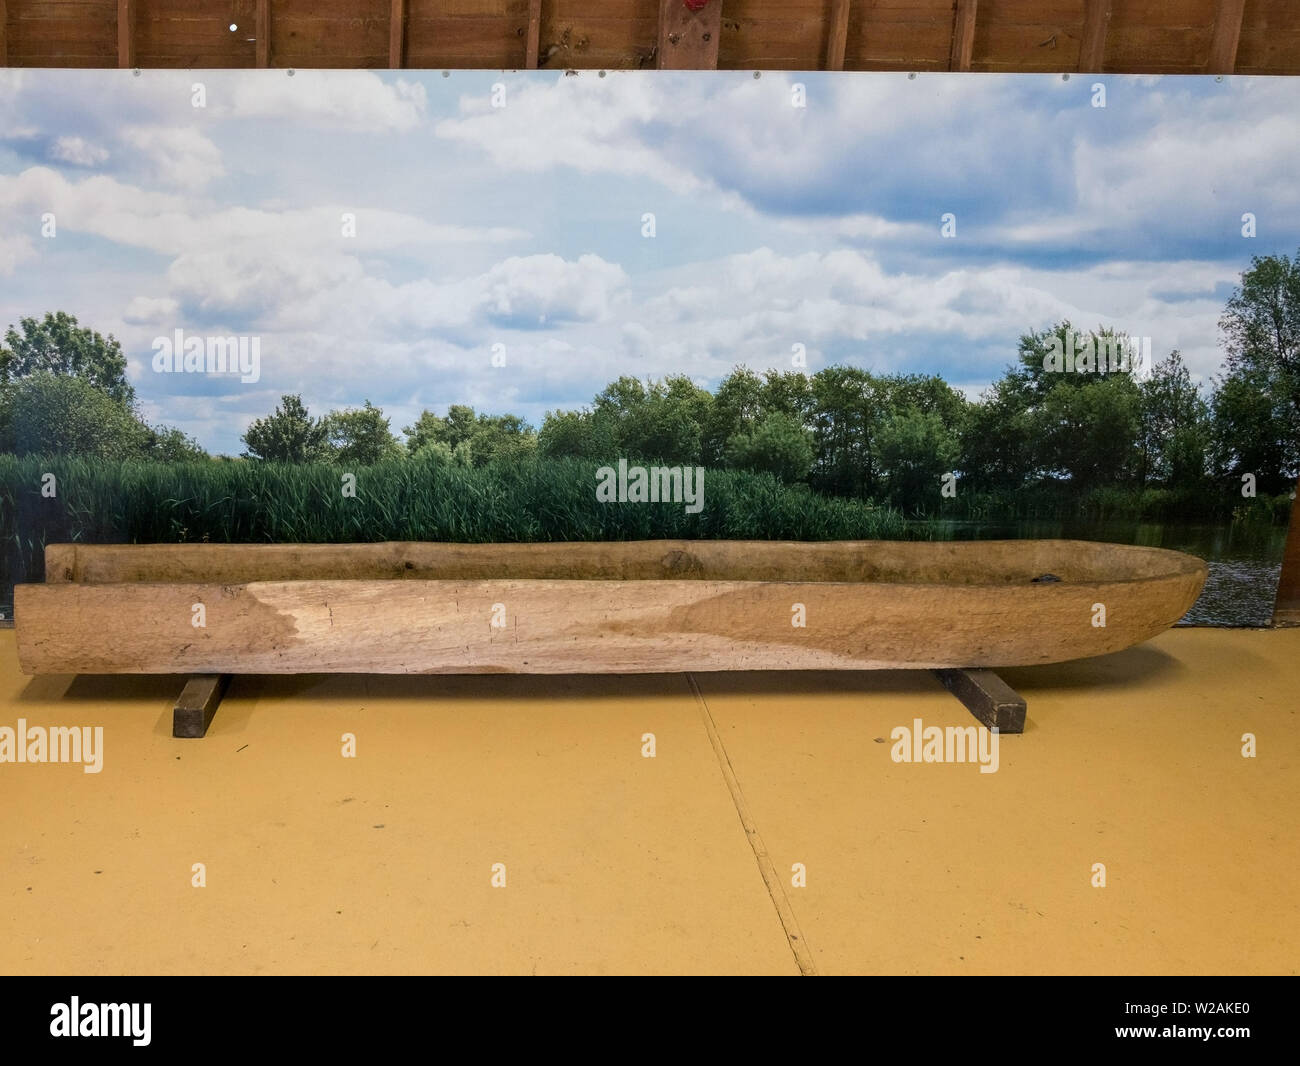 Reconstructed Bronze age log boat in front of painted display board, Flag Fen, Peterborough, Cambridgeshire, England, UK Stock Photo